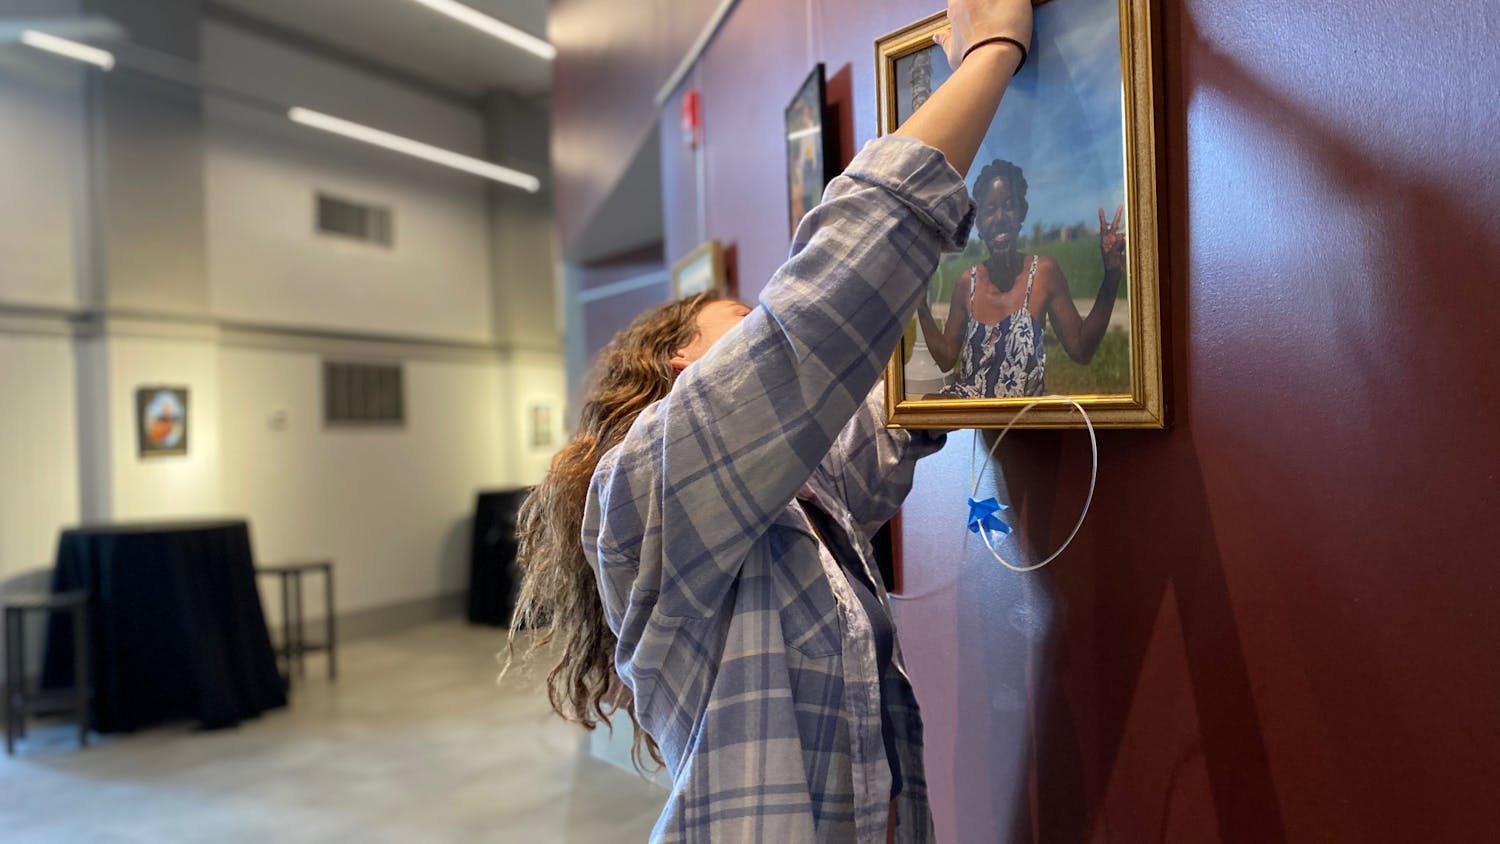 The &quot;Hipp Humans&quot; exhibit, which opened April 22, features portraits of change-makers and prominent figures across Gainesville.